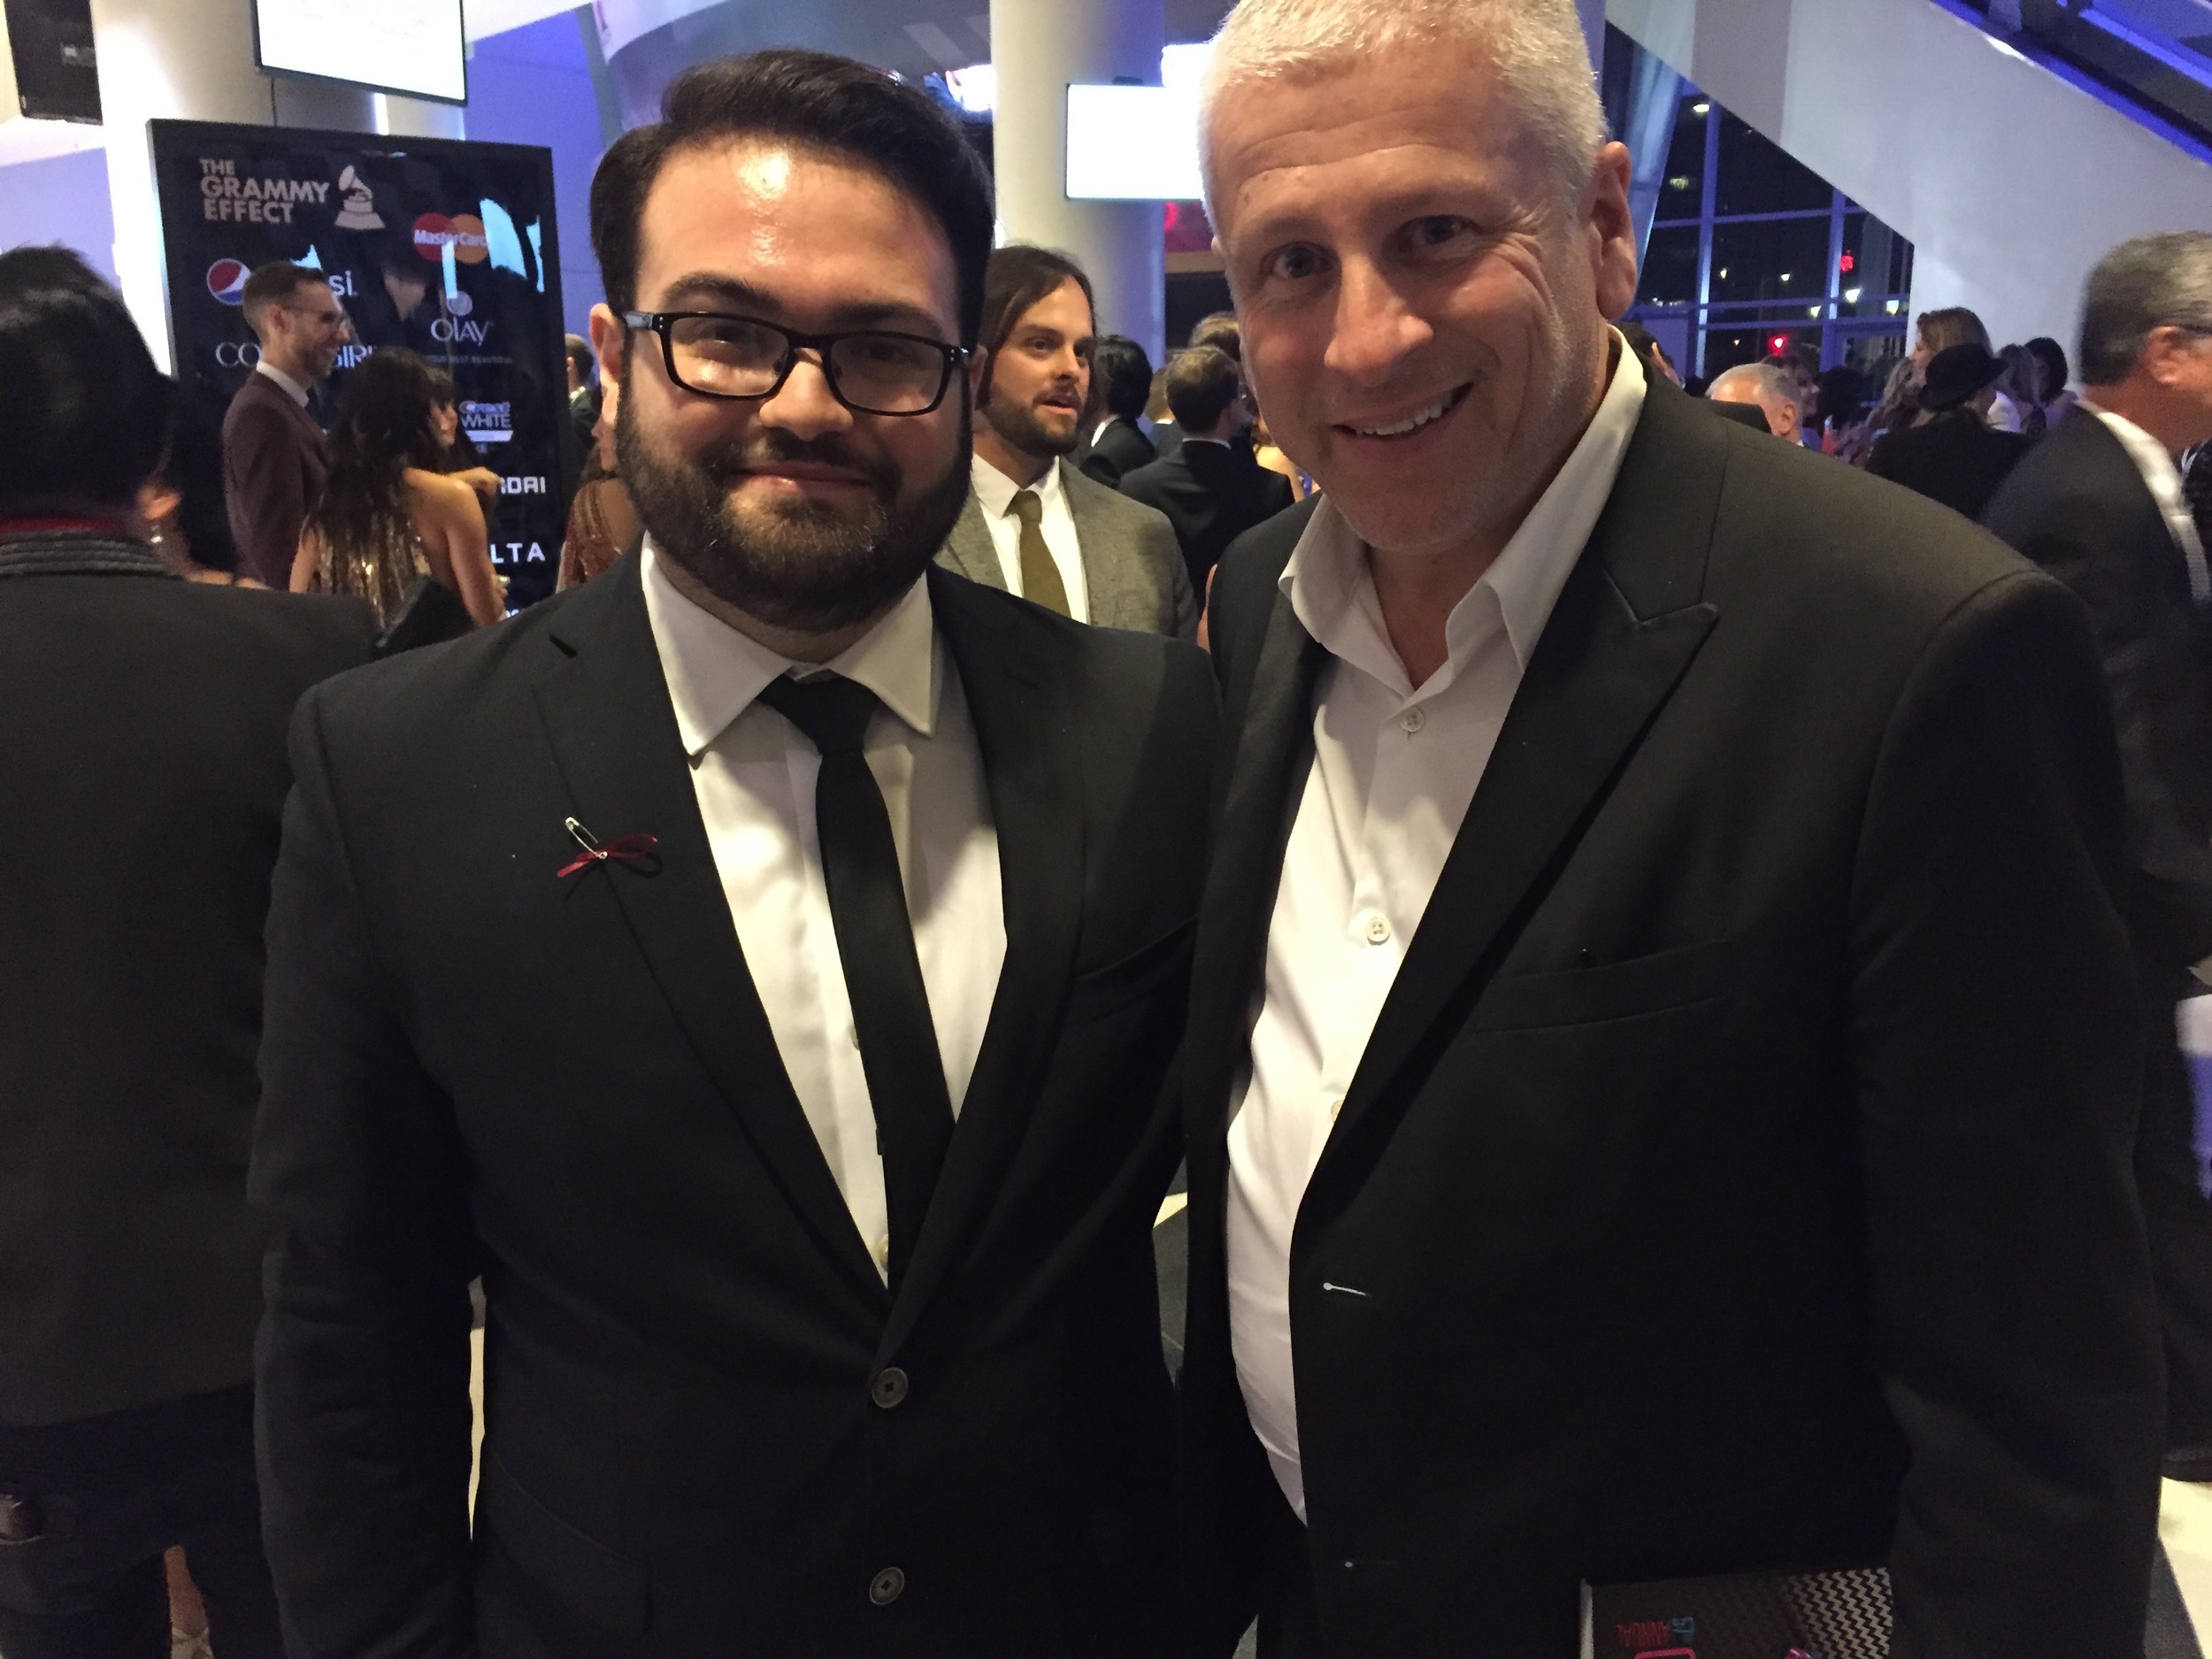 Myself & Louie Giglio at the GRAMMY® Awards (Photocred: Shelley Giglio)